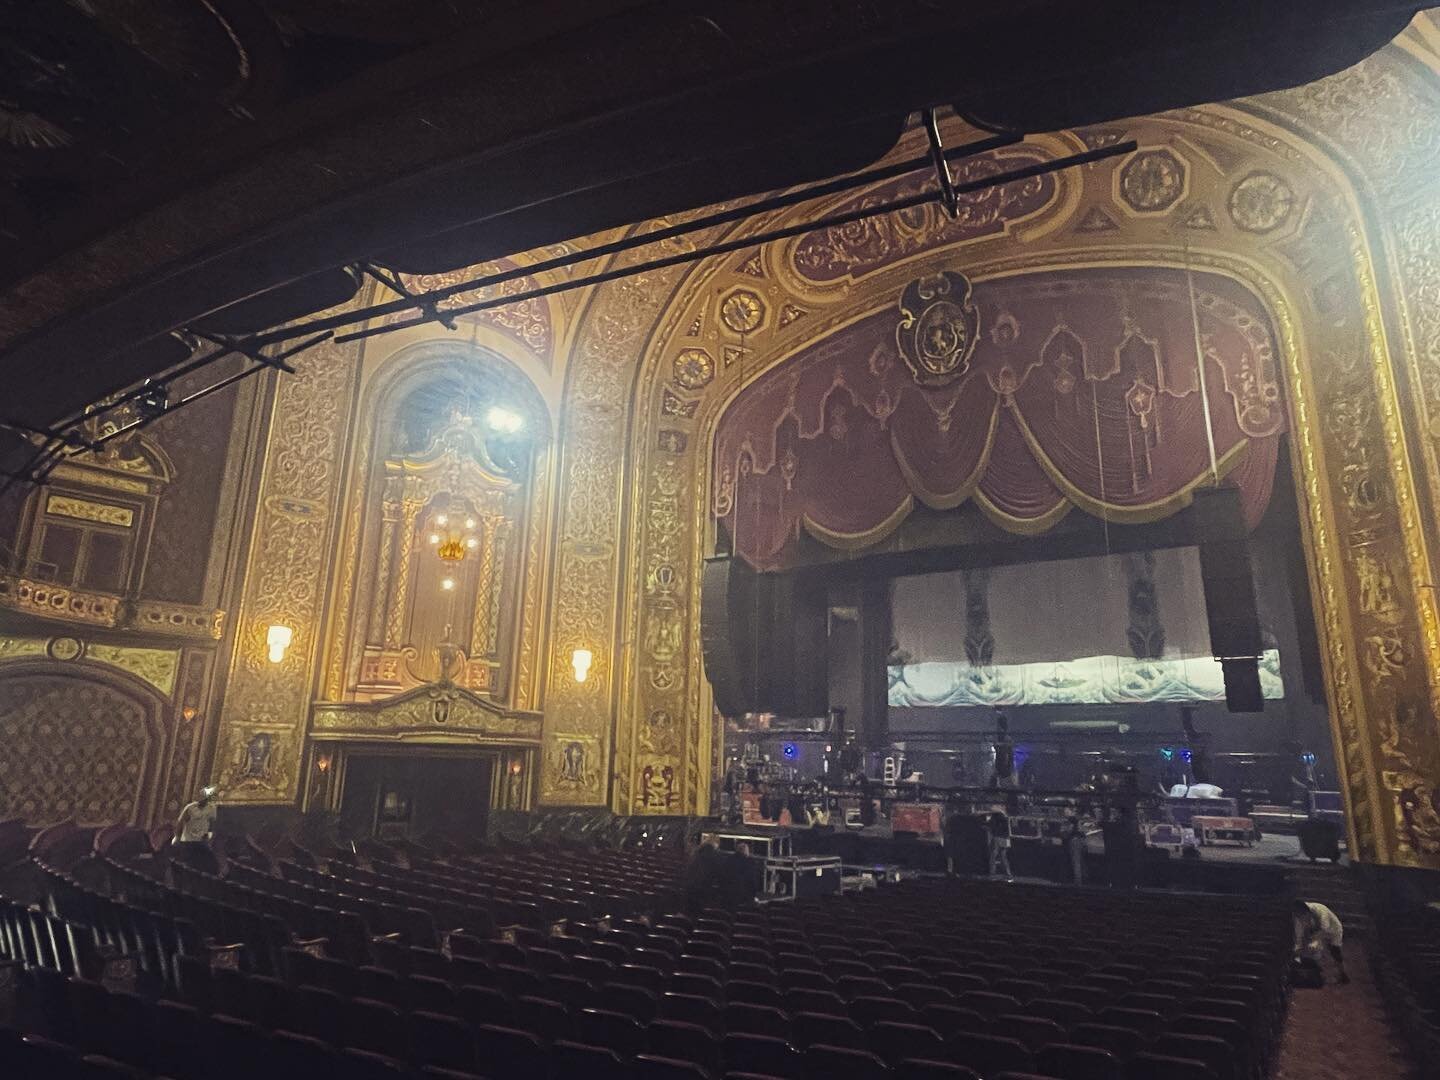 Providence performing arts Center&hellip; got a bit carried away with the gold leaf in the 20&rsquo;s. Beautiful place. 👌🏼🇺🇸